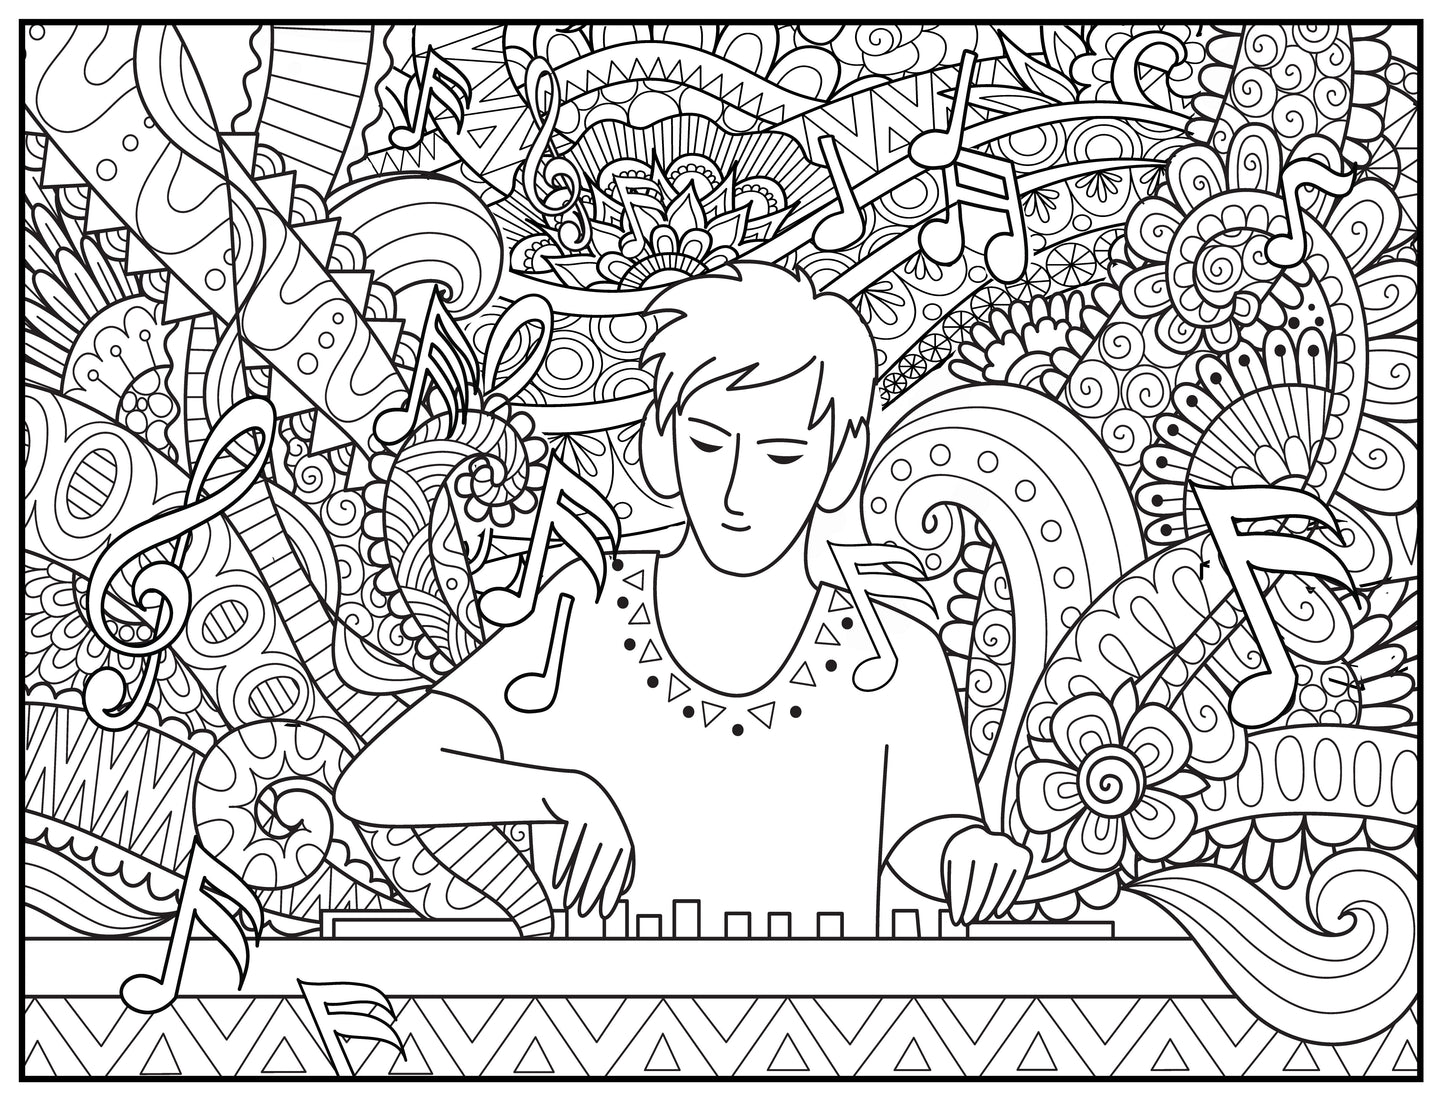 Music Man Personalized Giant Coloring Poster  46"x60"